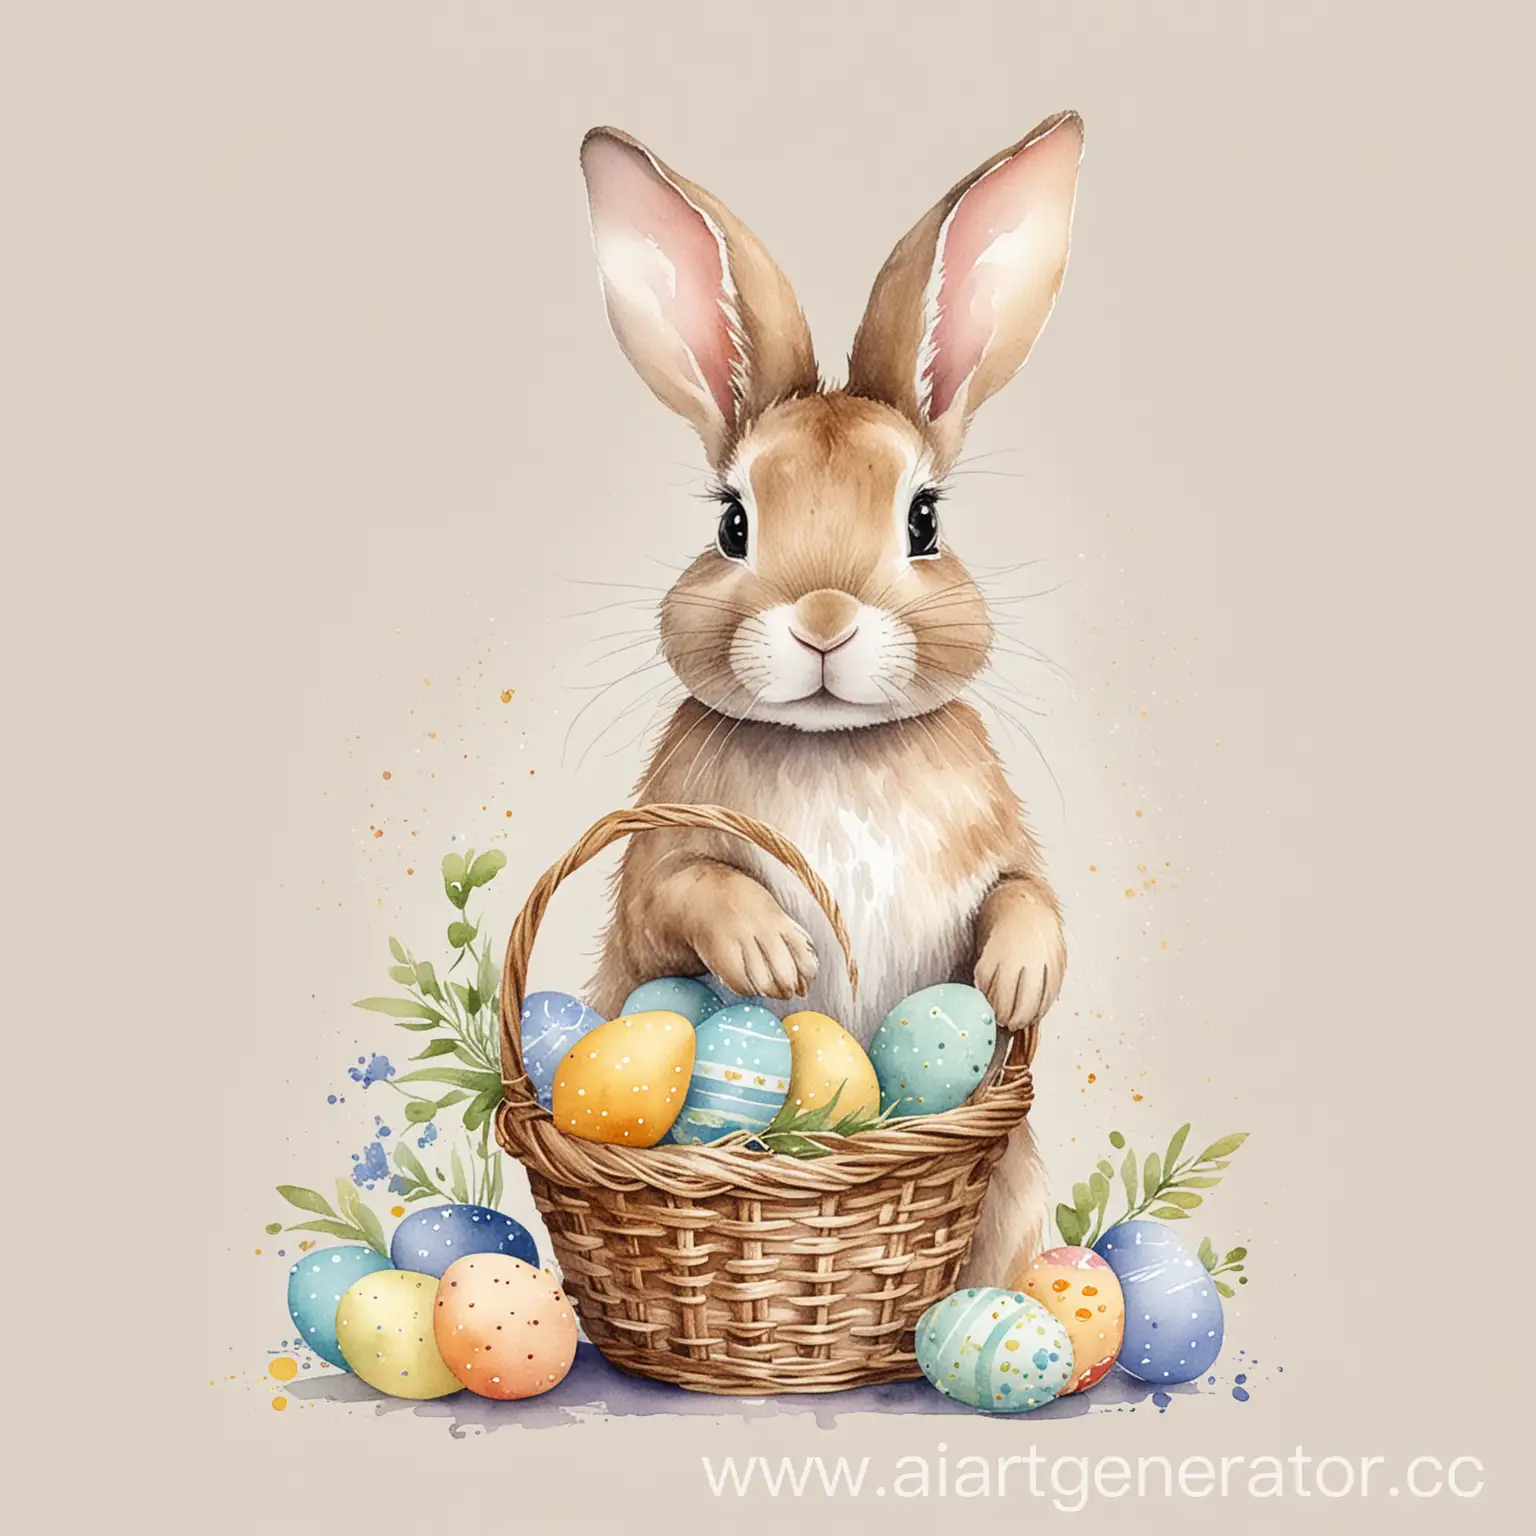 Easter-Bunny-Watercolor-Illustration-with-Basket-on-White-Background